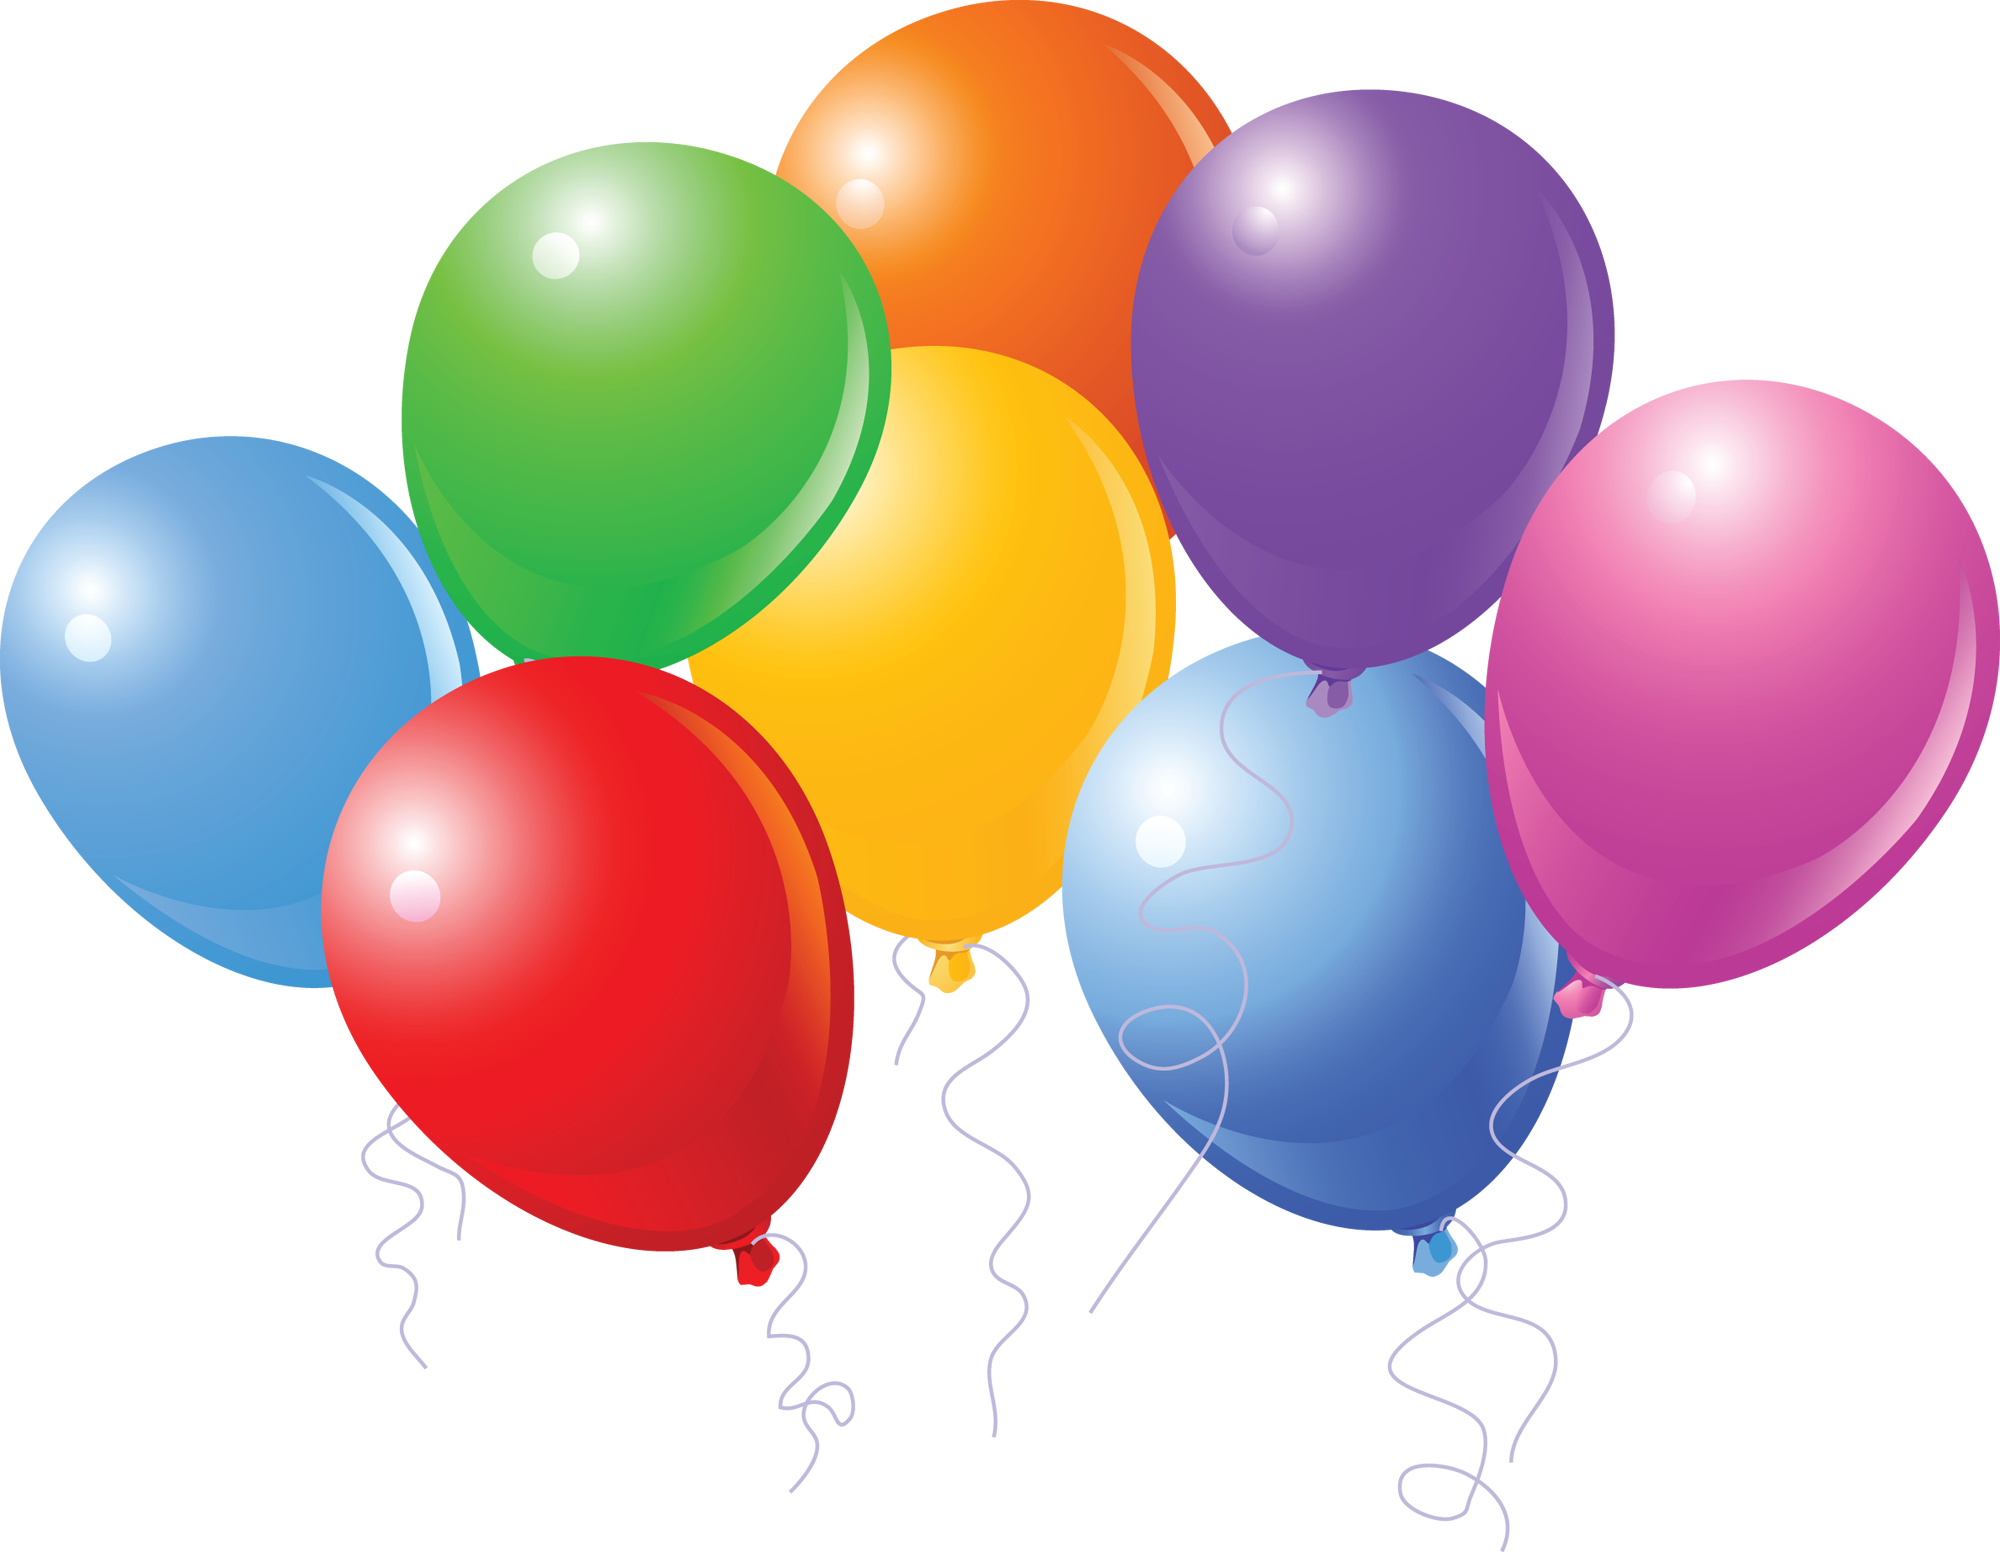 Picture Of Birthday Balloons - ClipArt Best